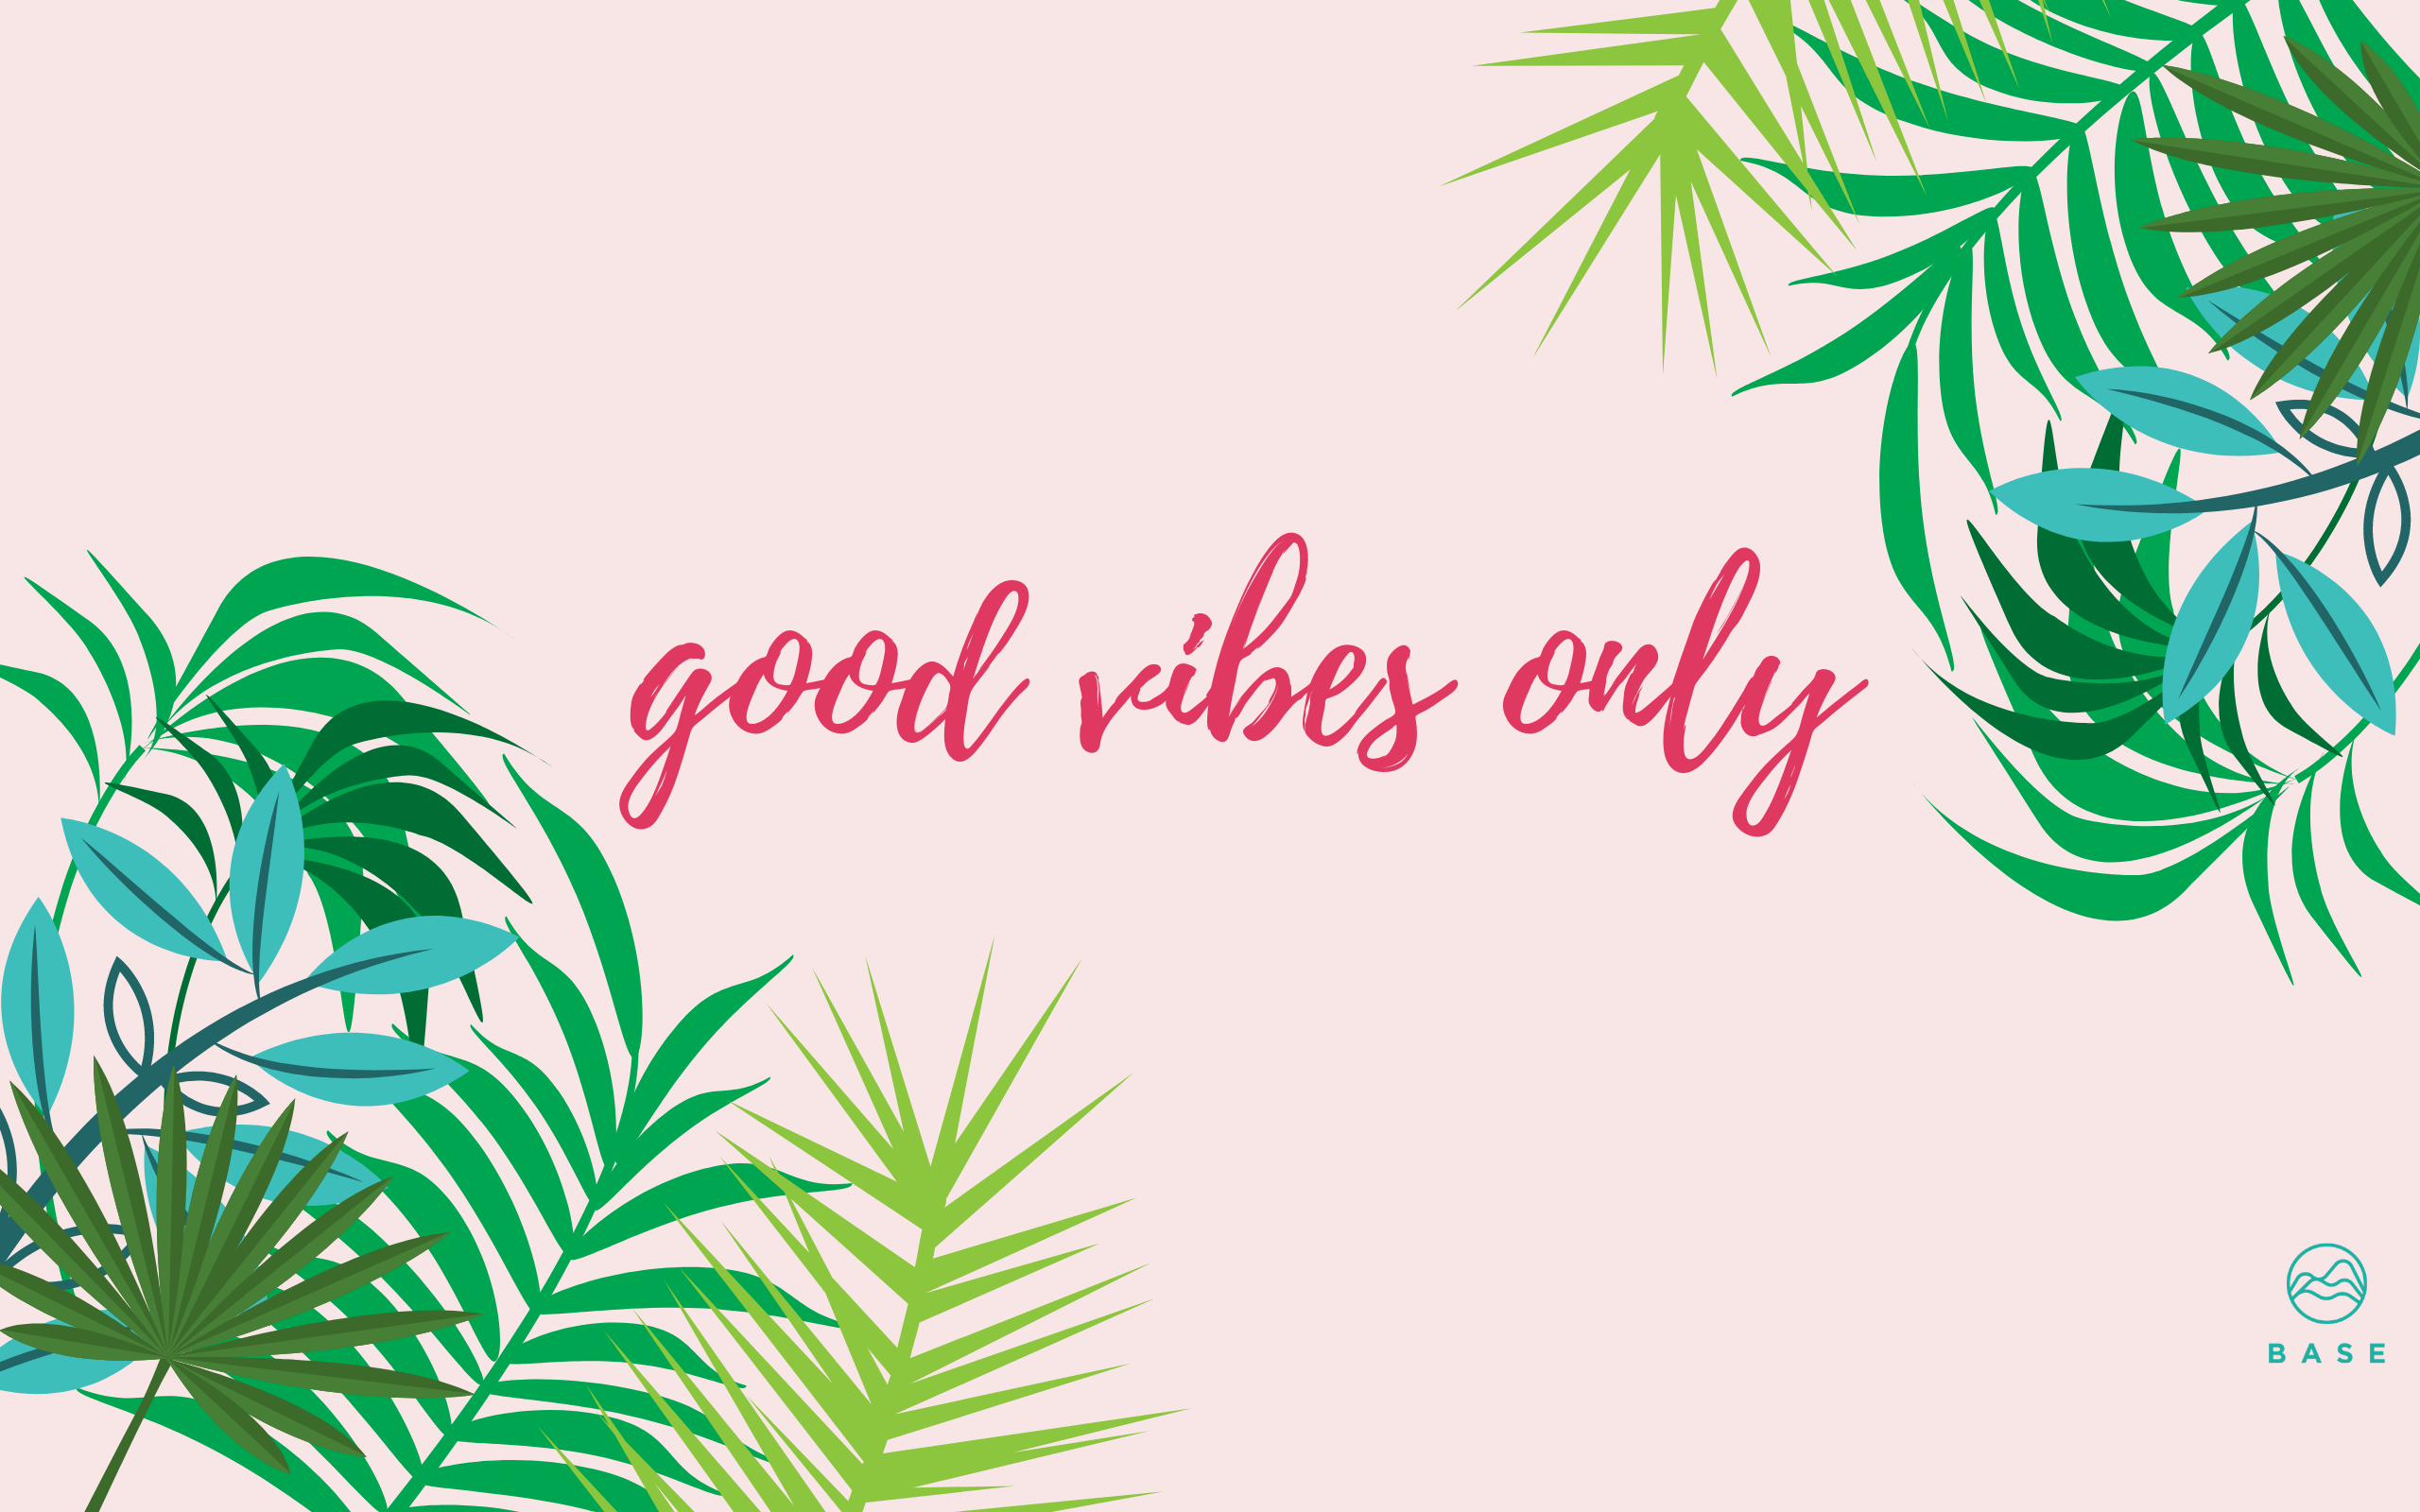 happy vibes wallpapers wallpaper cave happy vibes wallpapers wallpaper cave